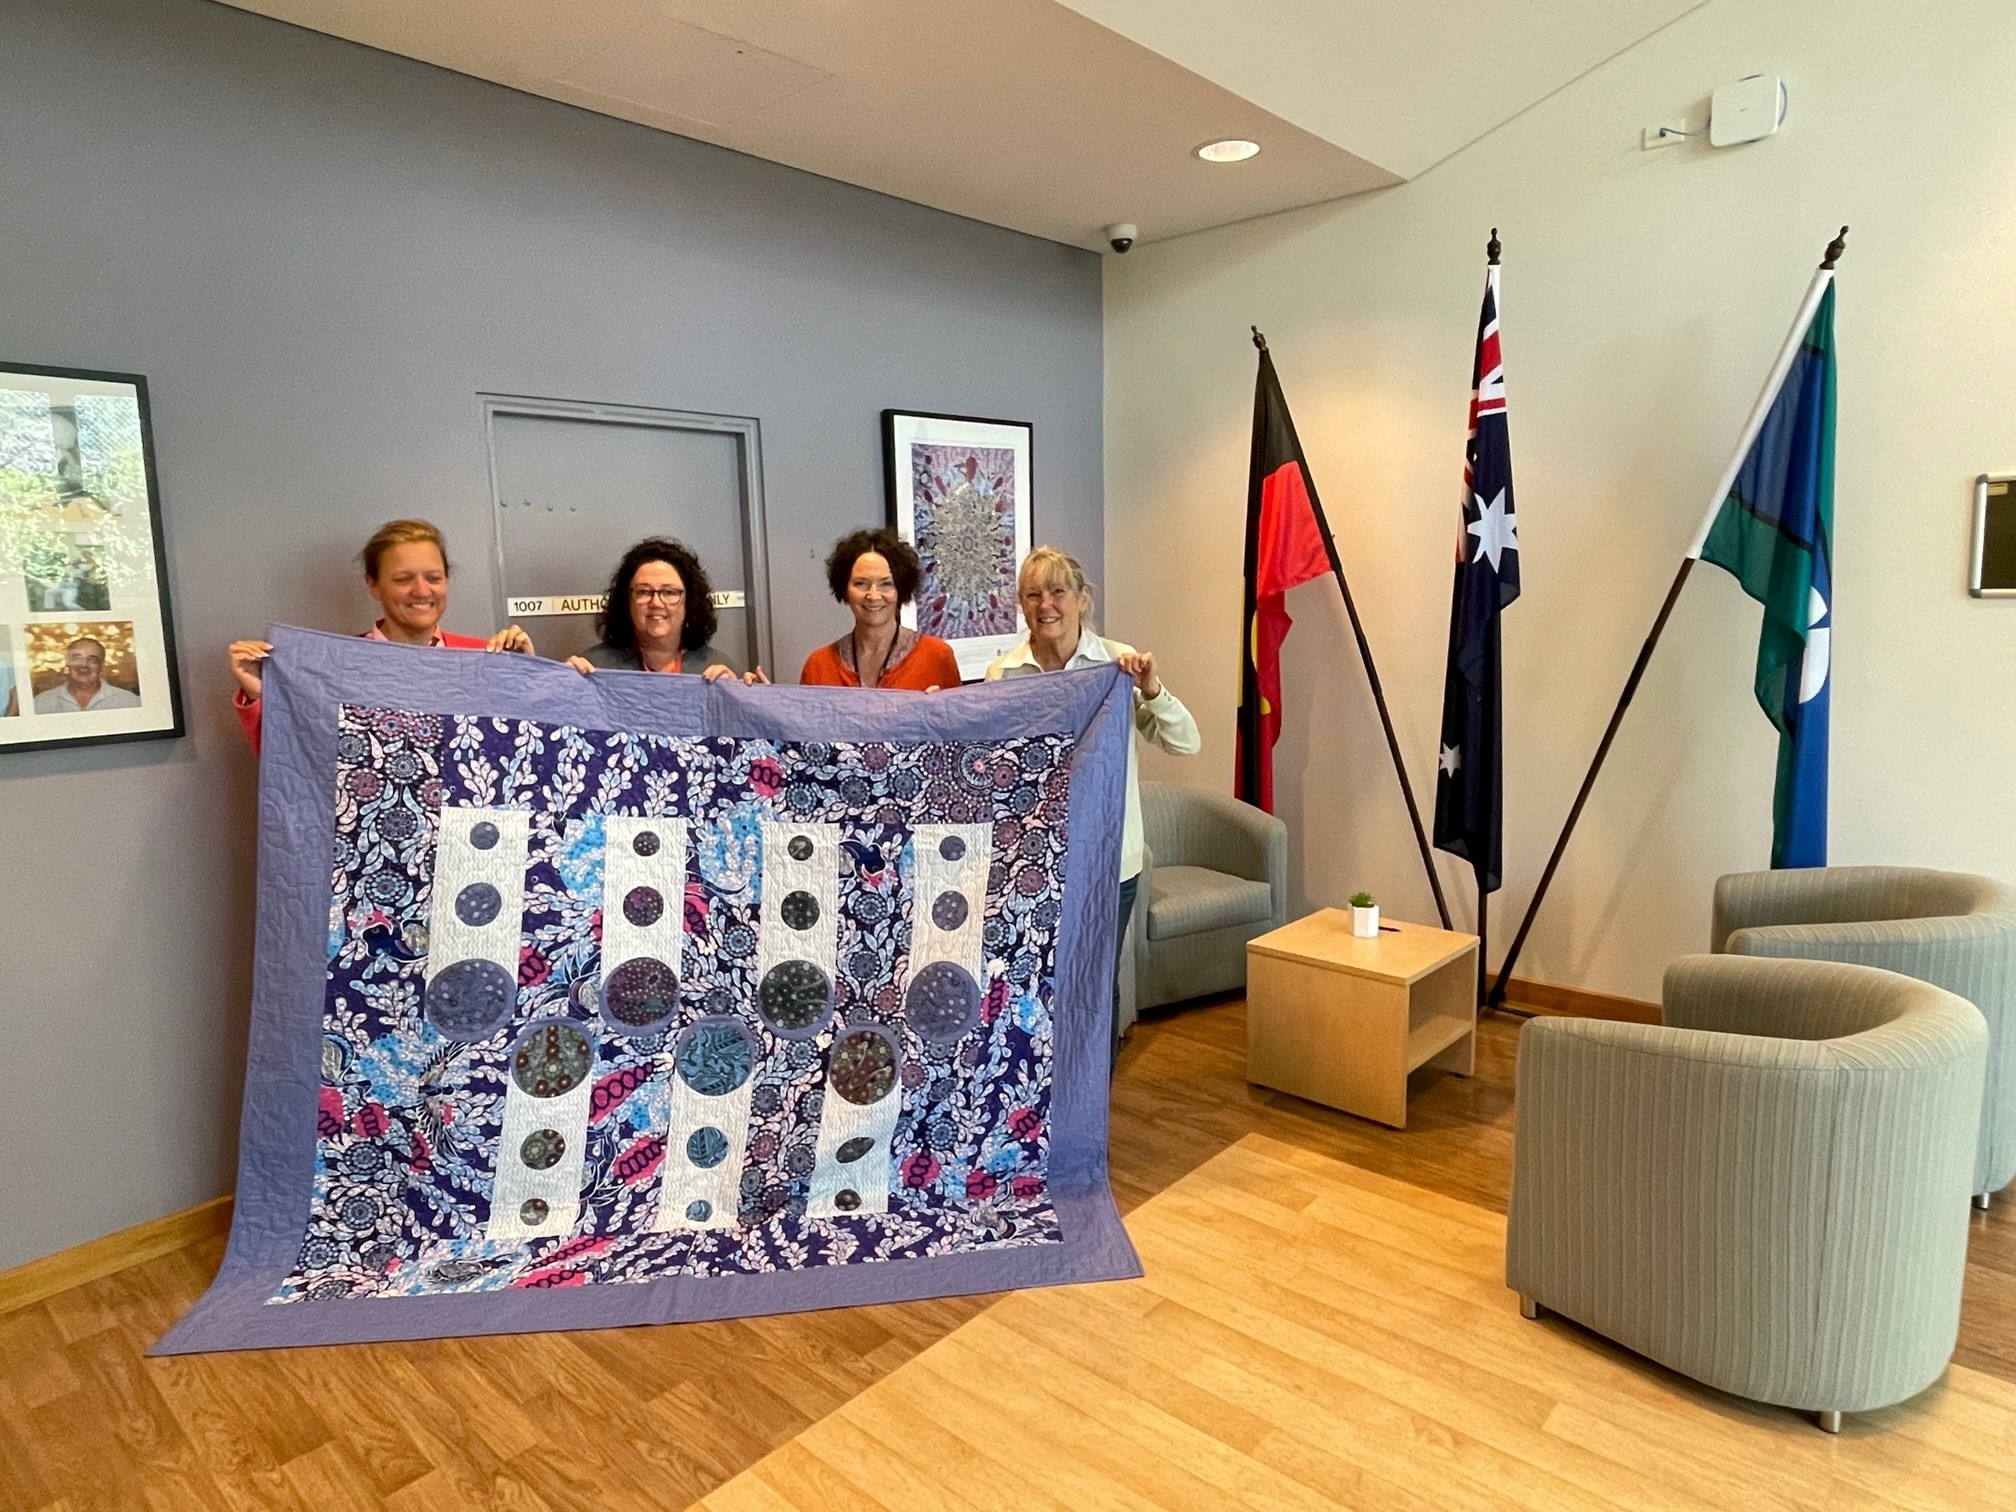 A new quilt for Forensic Medicine